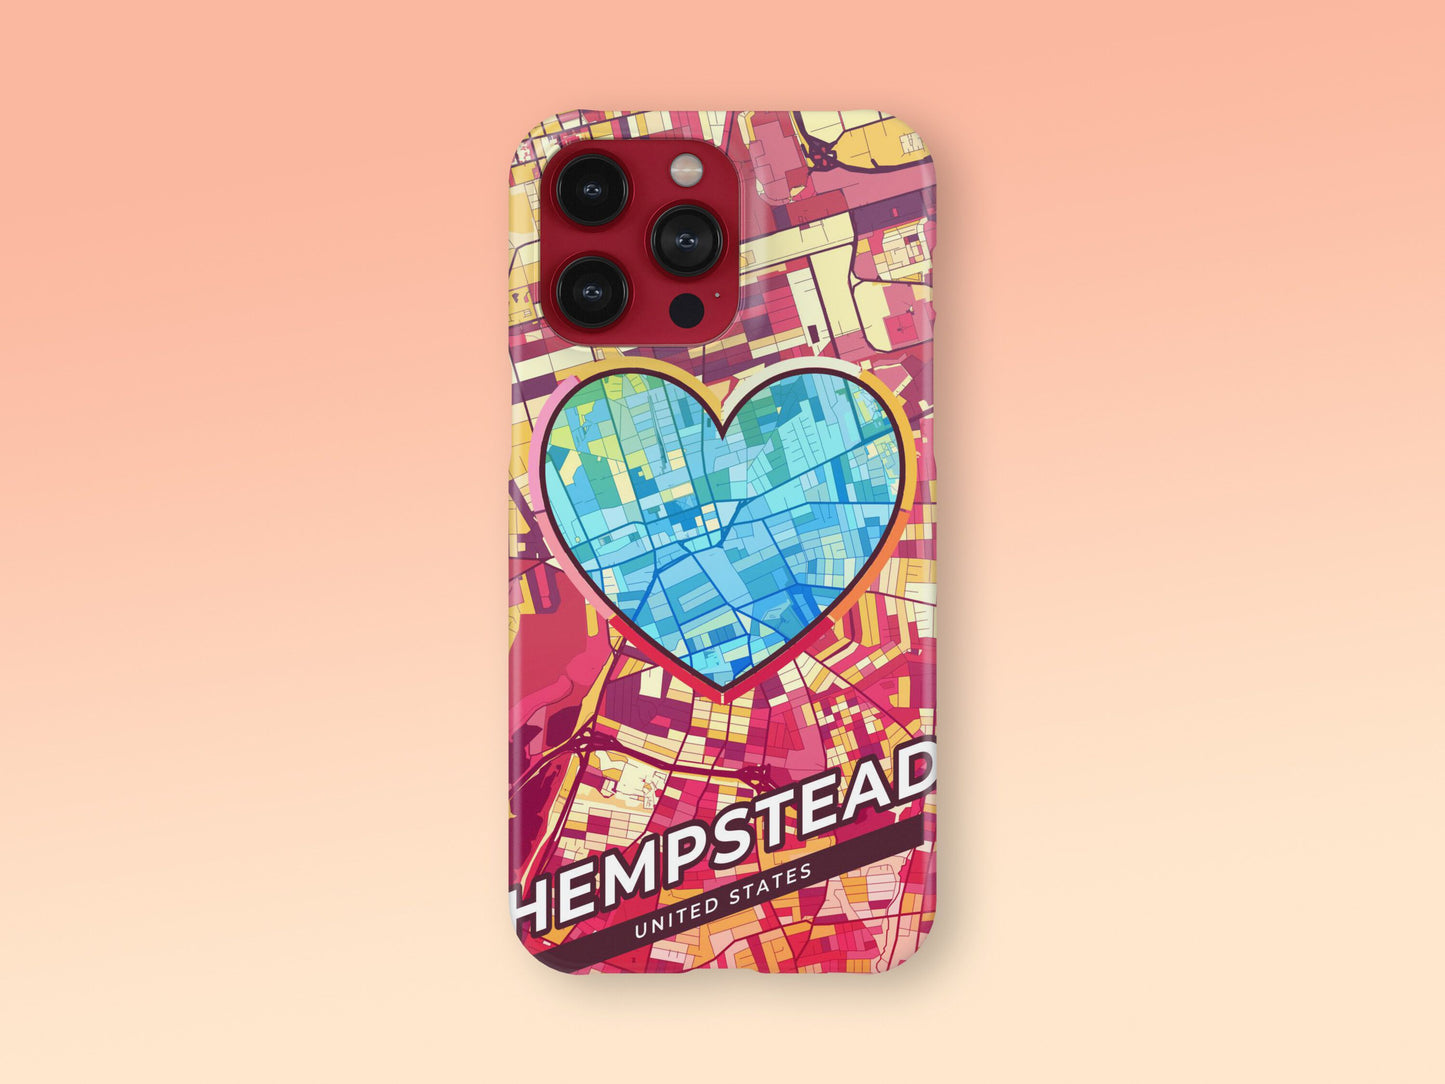 Hempstead New York slim phone case with colorful icon. Birthday, wedding or housewarming gift. Couple match cases. 2